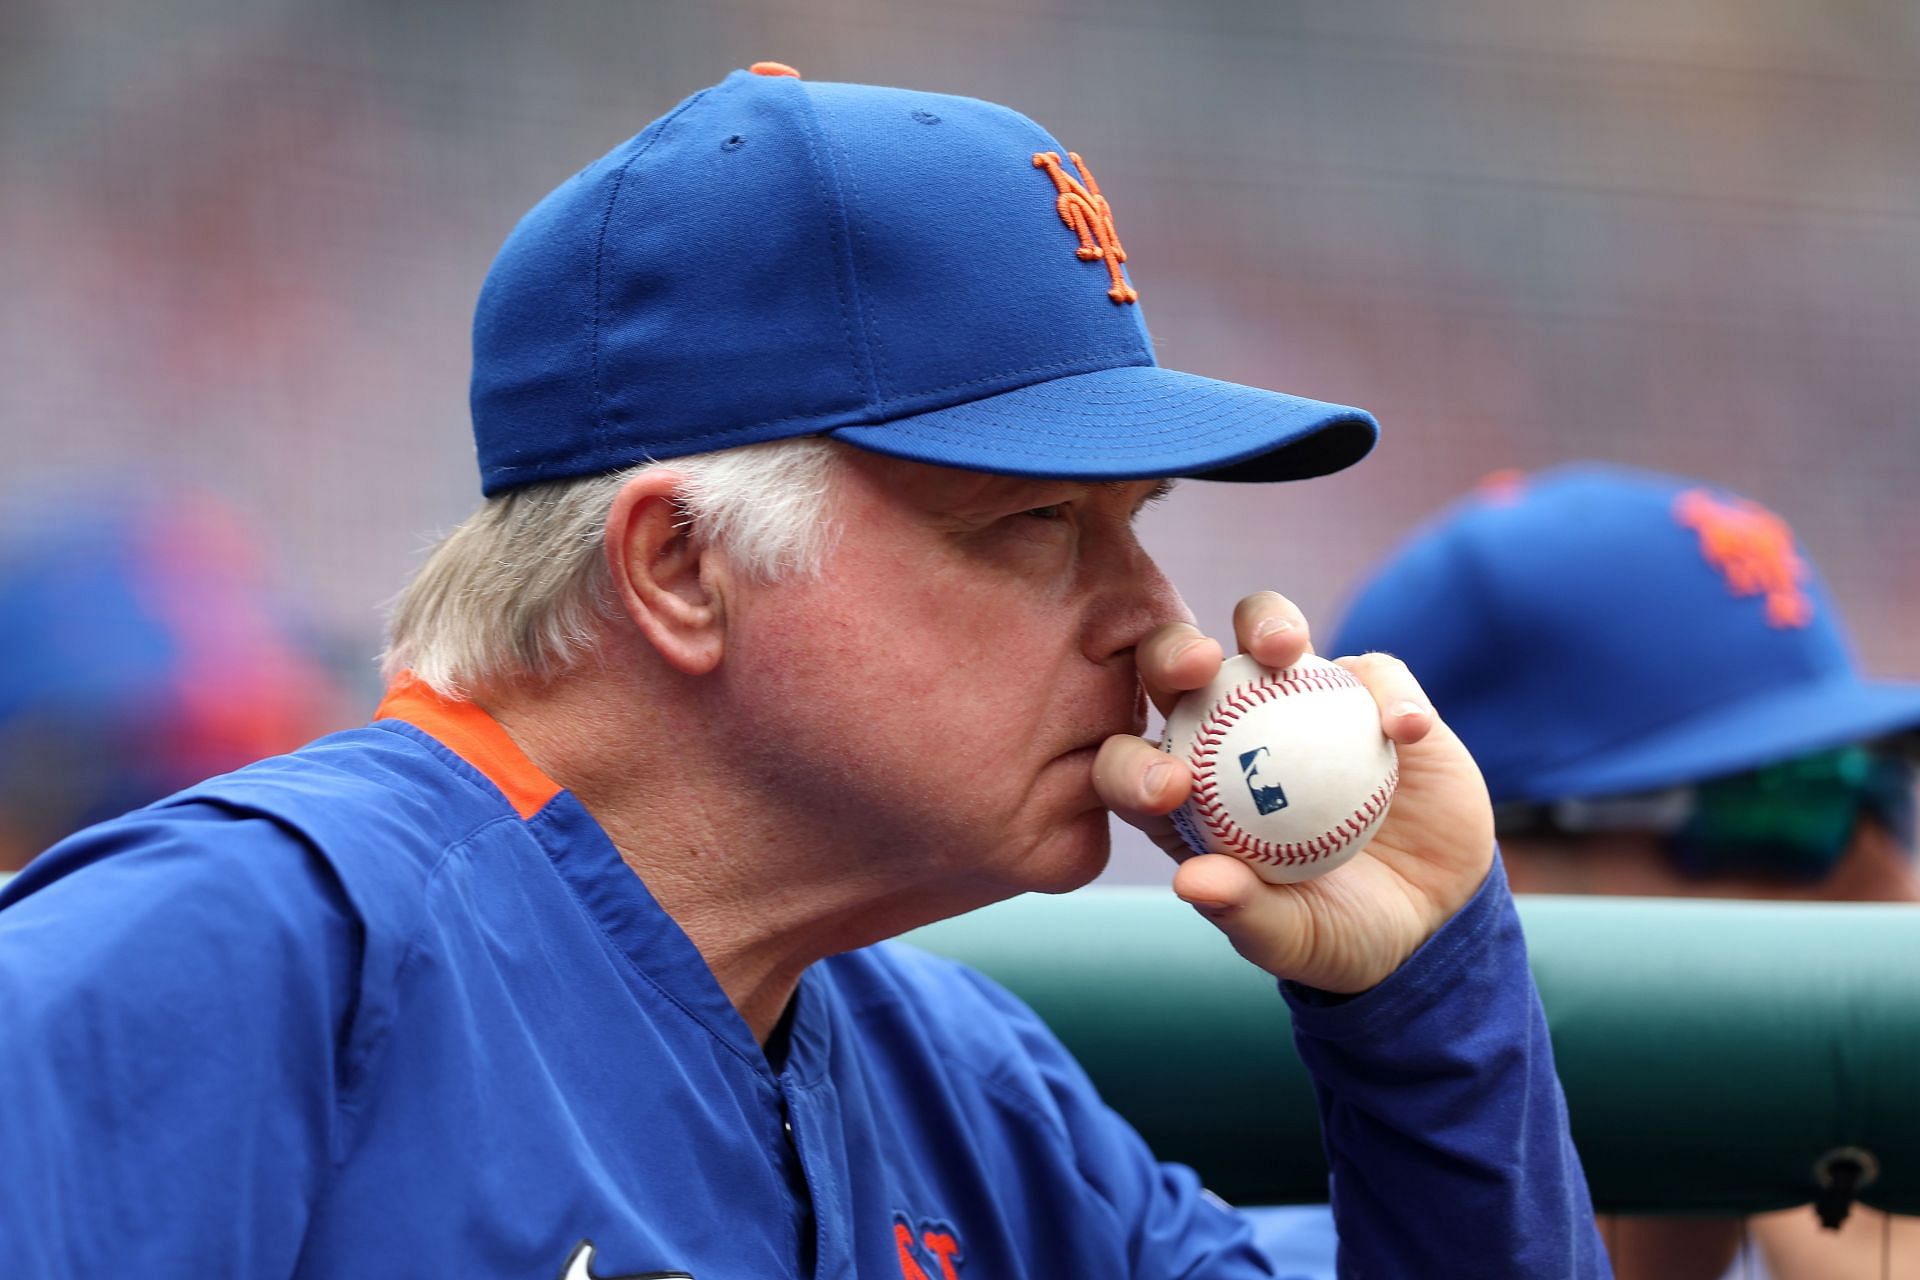 New York Mets manager Buck Showalter thinks the MLB All-Star Game should include a utility player position.